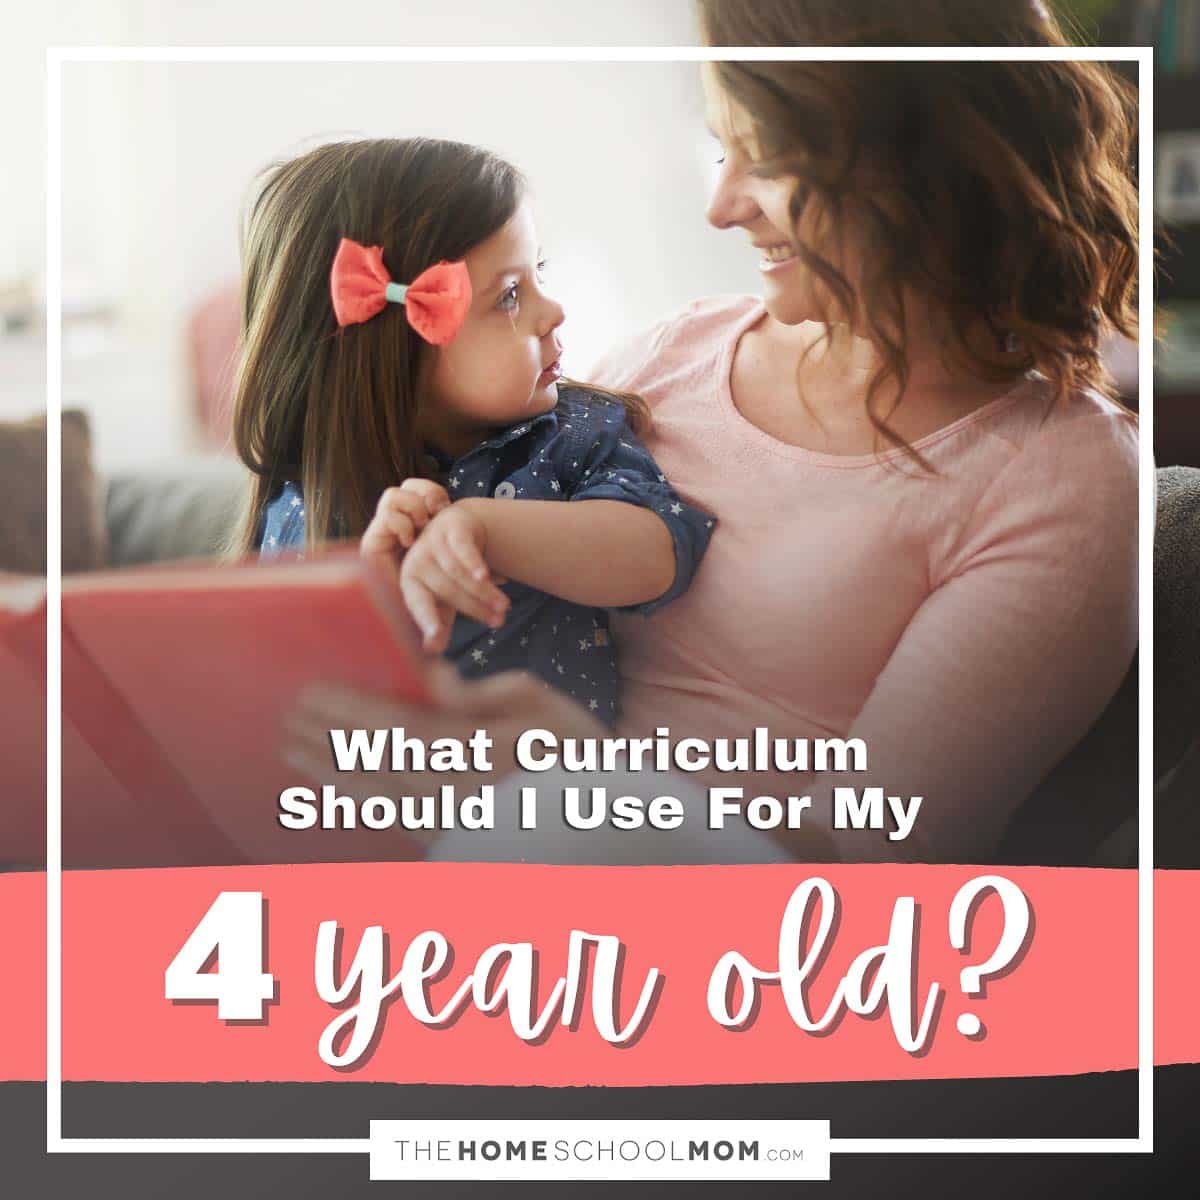 What curriculum should I use for my 4 year old?